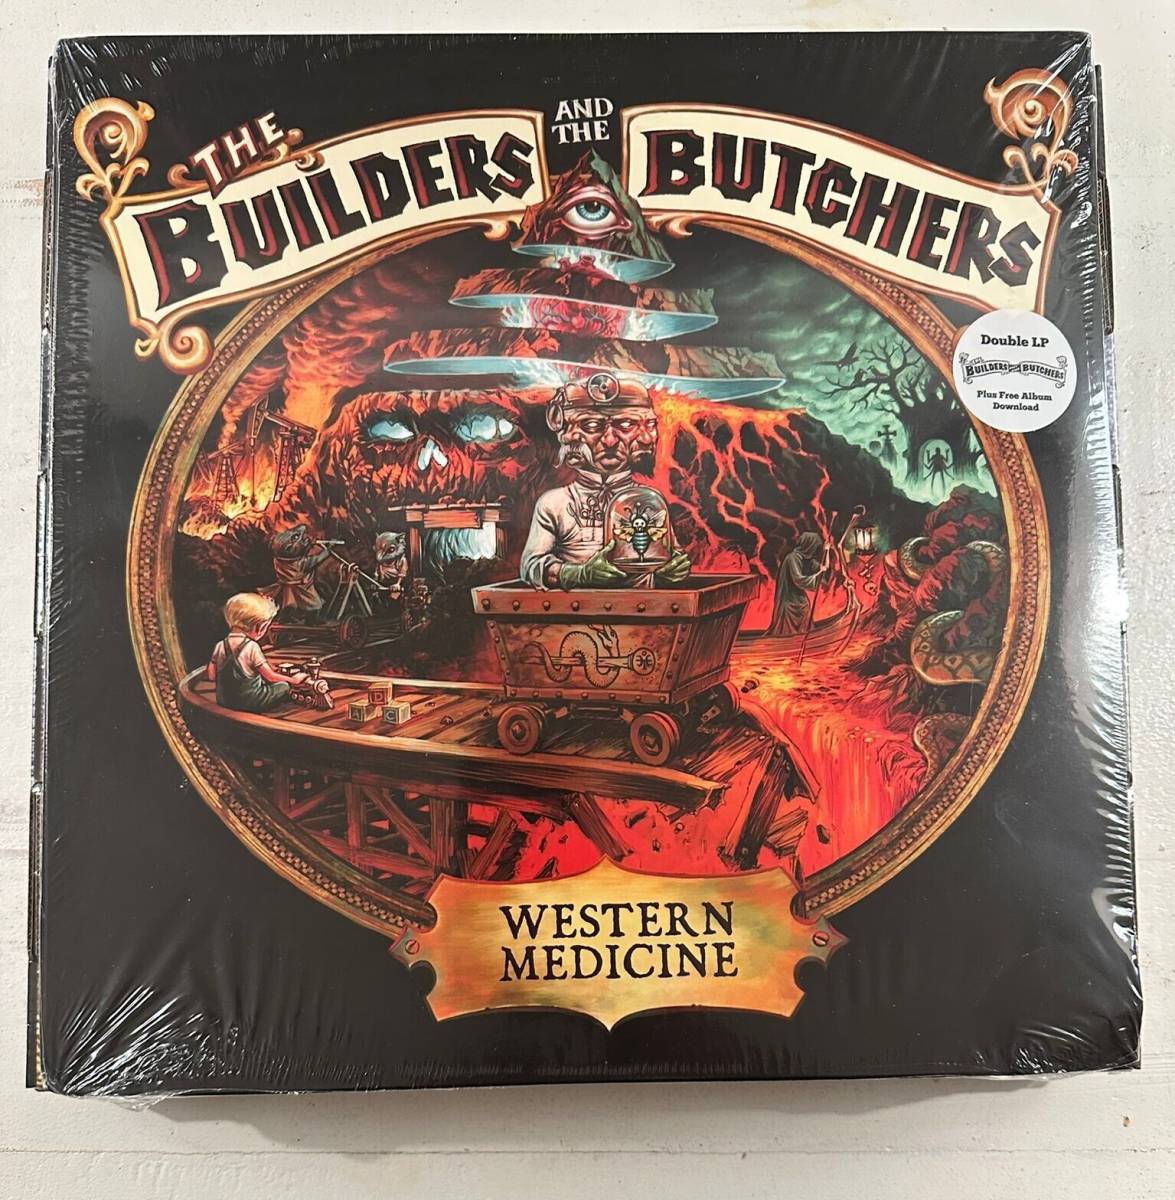 THE BUILDERS AND THE BUTCHERS WESTERN MEDICINE - VINYL 2x LP NEW FREE SHIP -13 海外 即決